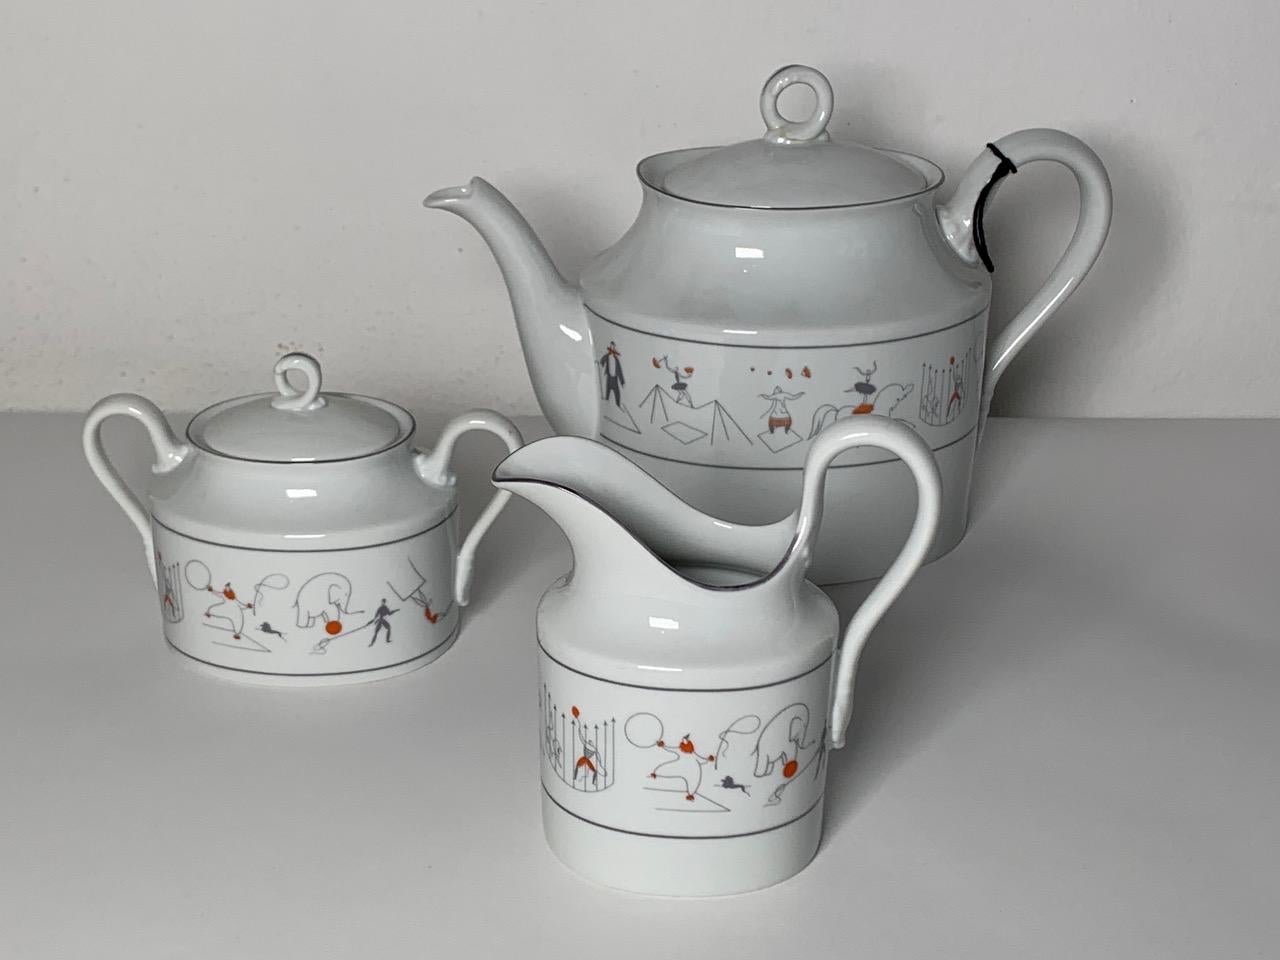 Circo model tea set designed by Gio Ponti for Richard Ginori in 1960-1970. Project carried out by the Lazzaroni confectionery company. Signed.
6 tea cups
1 sugar bowl
1 milk jug 12 cm W x H 12 cm x D 7 cm
Teapot 26 cm W x H 20 cm x D 13 cm.
 